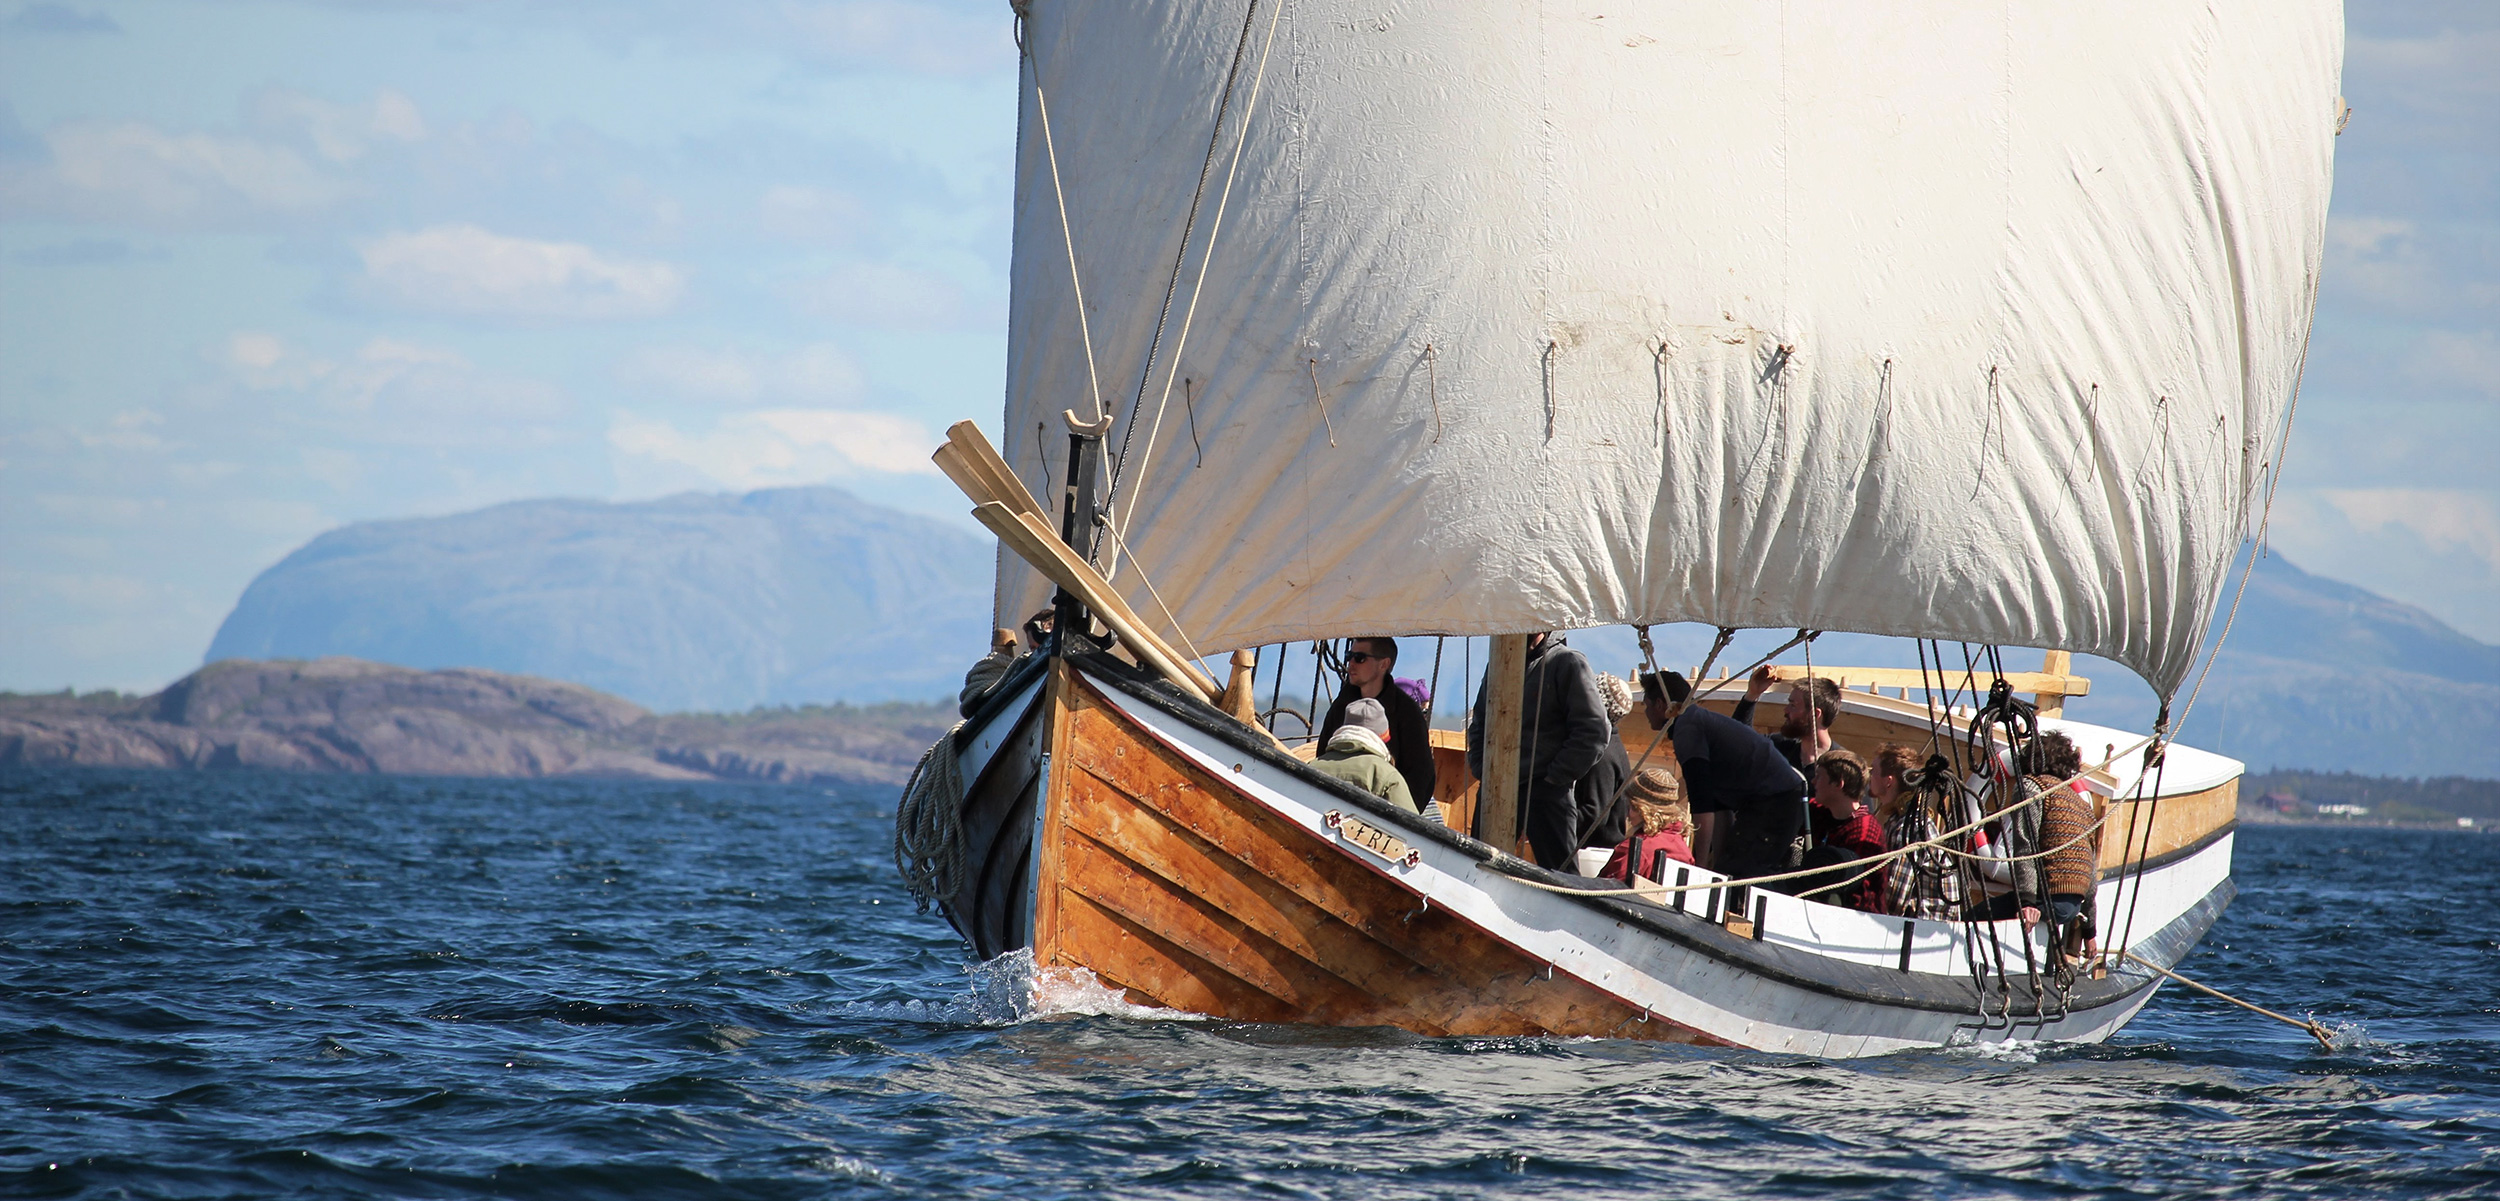 Fosen Folk High School students sailing a square-sail-rigged boat in the Trondheim Fjord. Square sails were the norm in Viking days. Photo by Claire Eamer